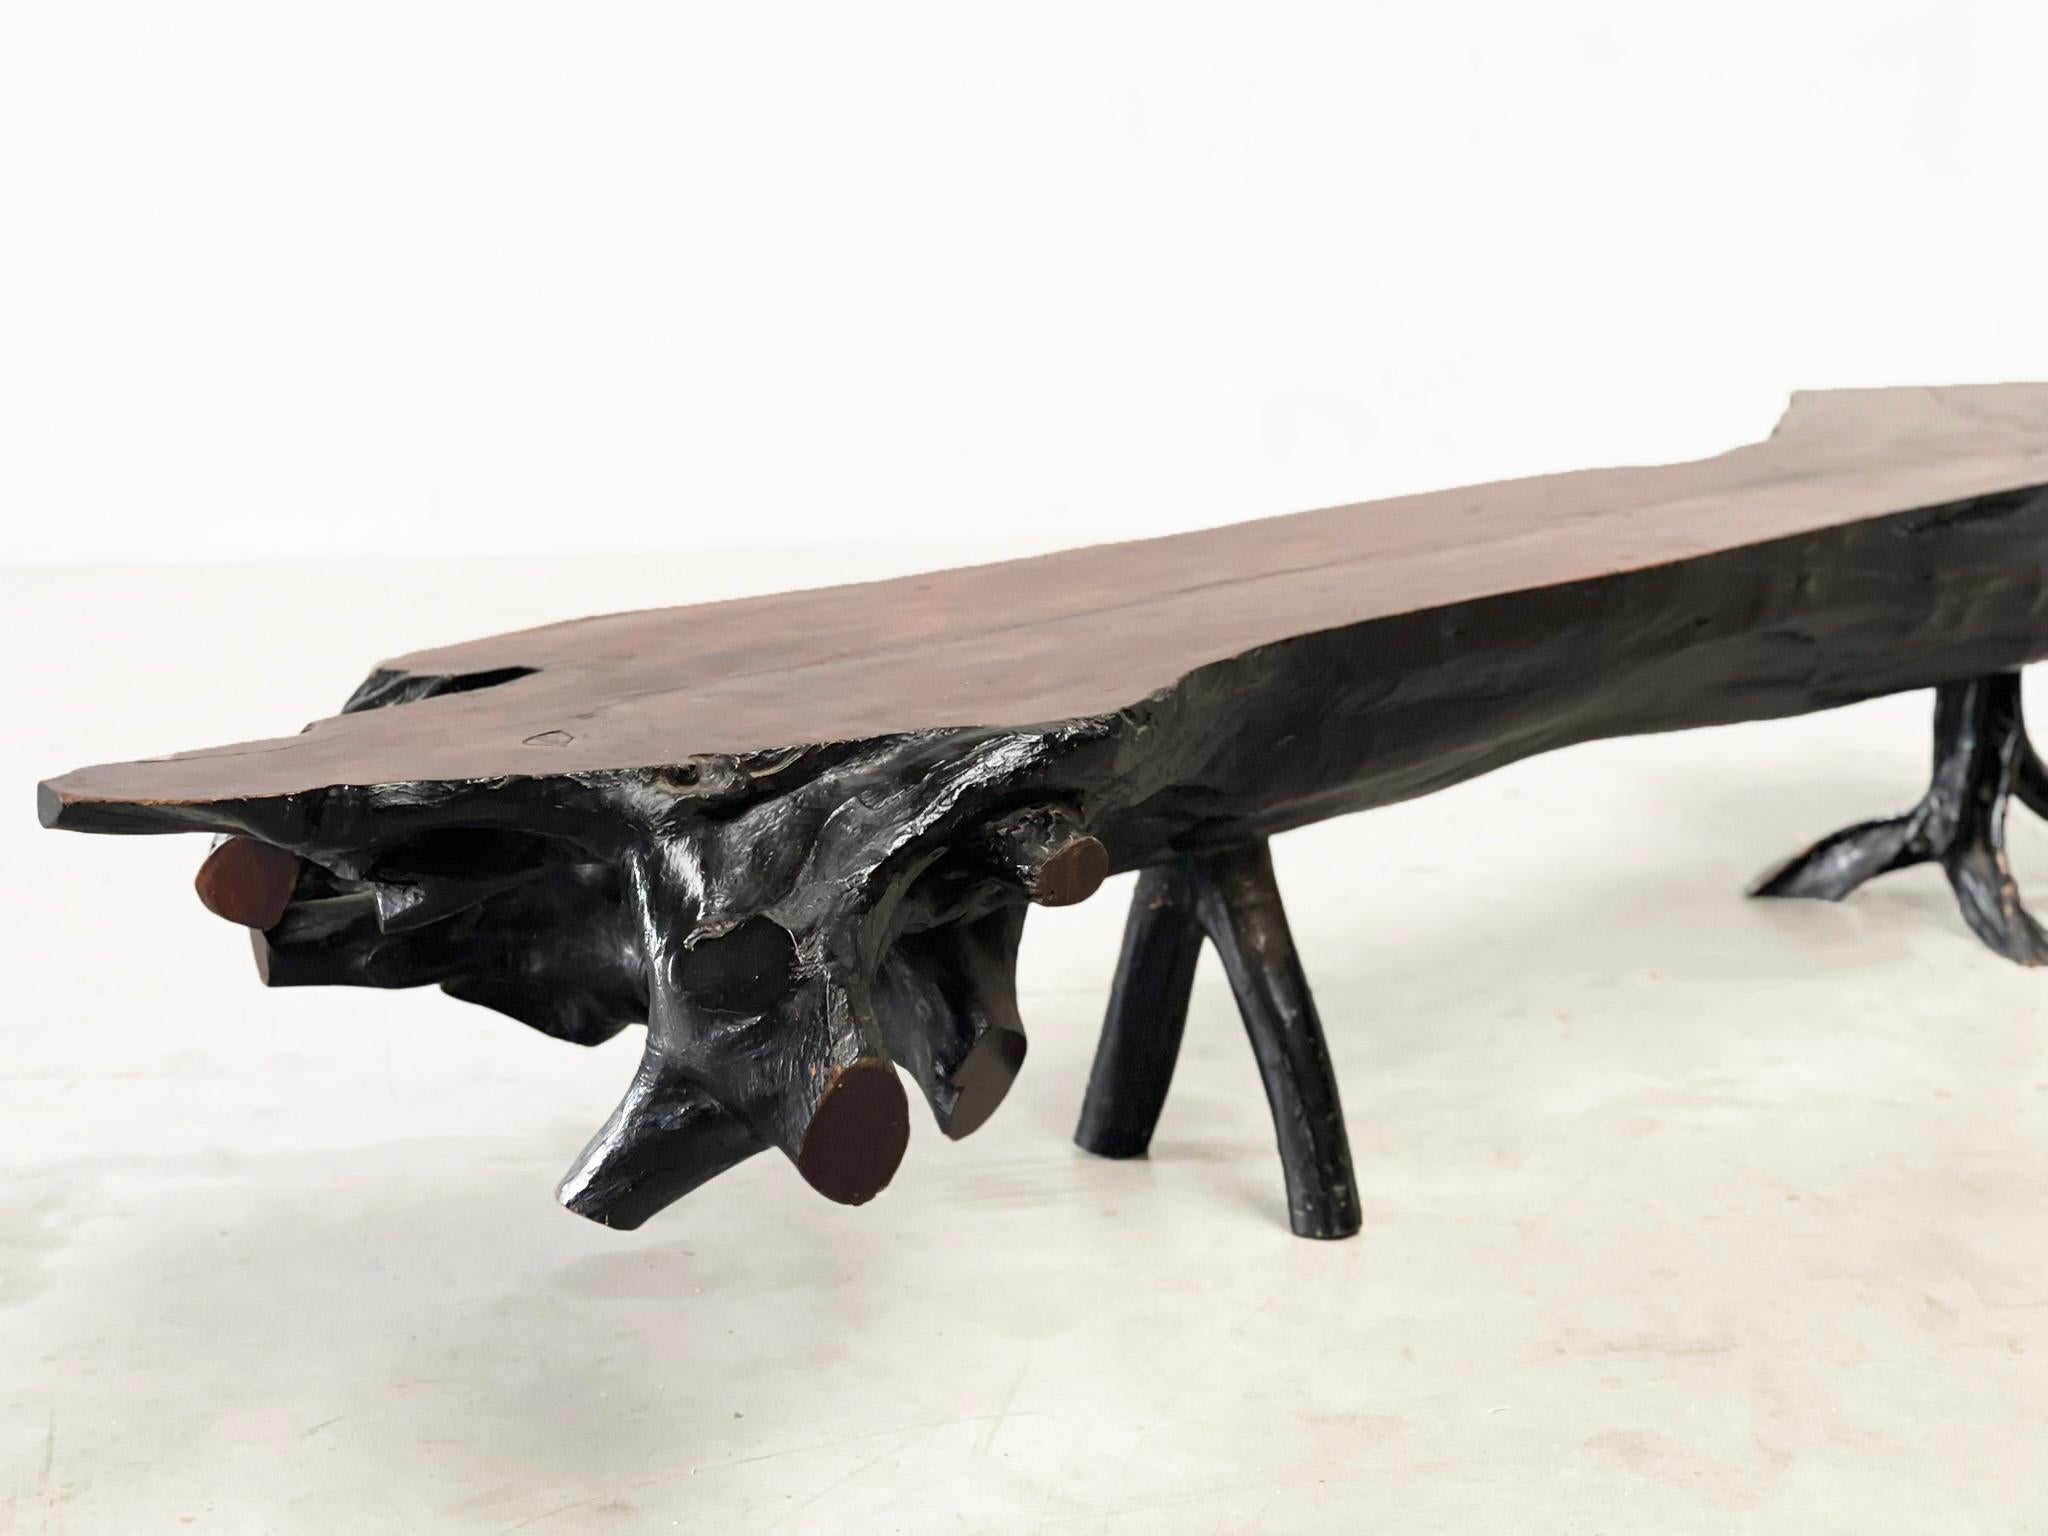 XXL 240cm Tree Trunk table / bench
Design in its purest form. A very heavy coffee table made in the 80s. The wood has acquired a very nice patina over the years. The table is a very large and heavy piece.

 

Measurements: 

Width: 237cm
Depth: